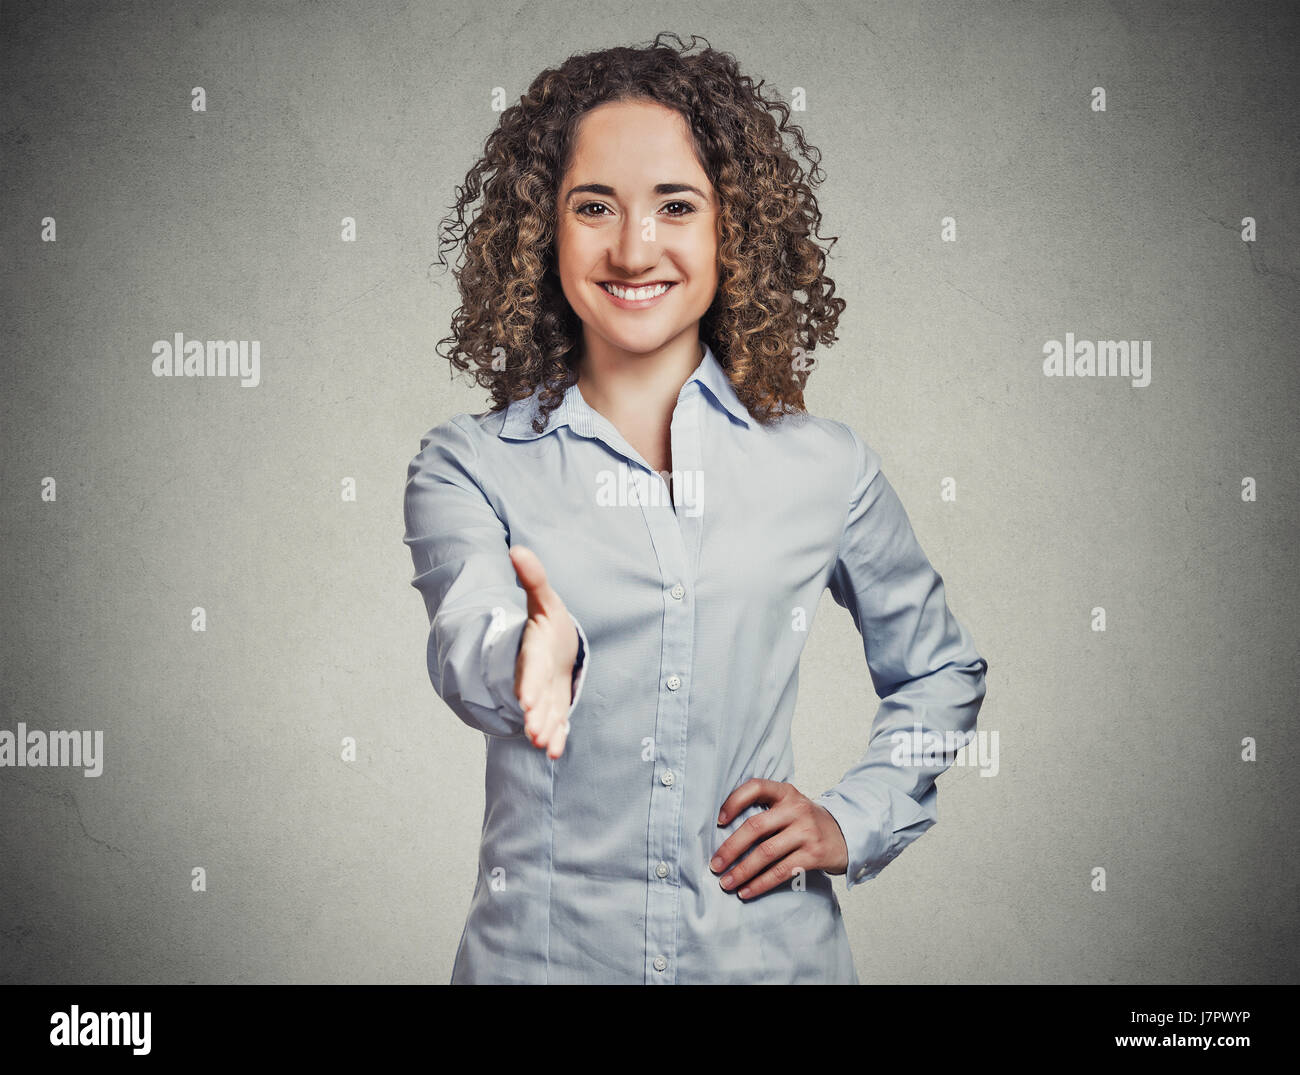 Closeup portrait, young, curly, brown hair, smiling woman, student, customer service agent giving you handshake isolated grey wall background. Positiv Stock Photo